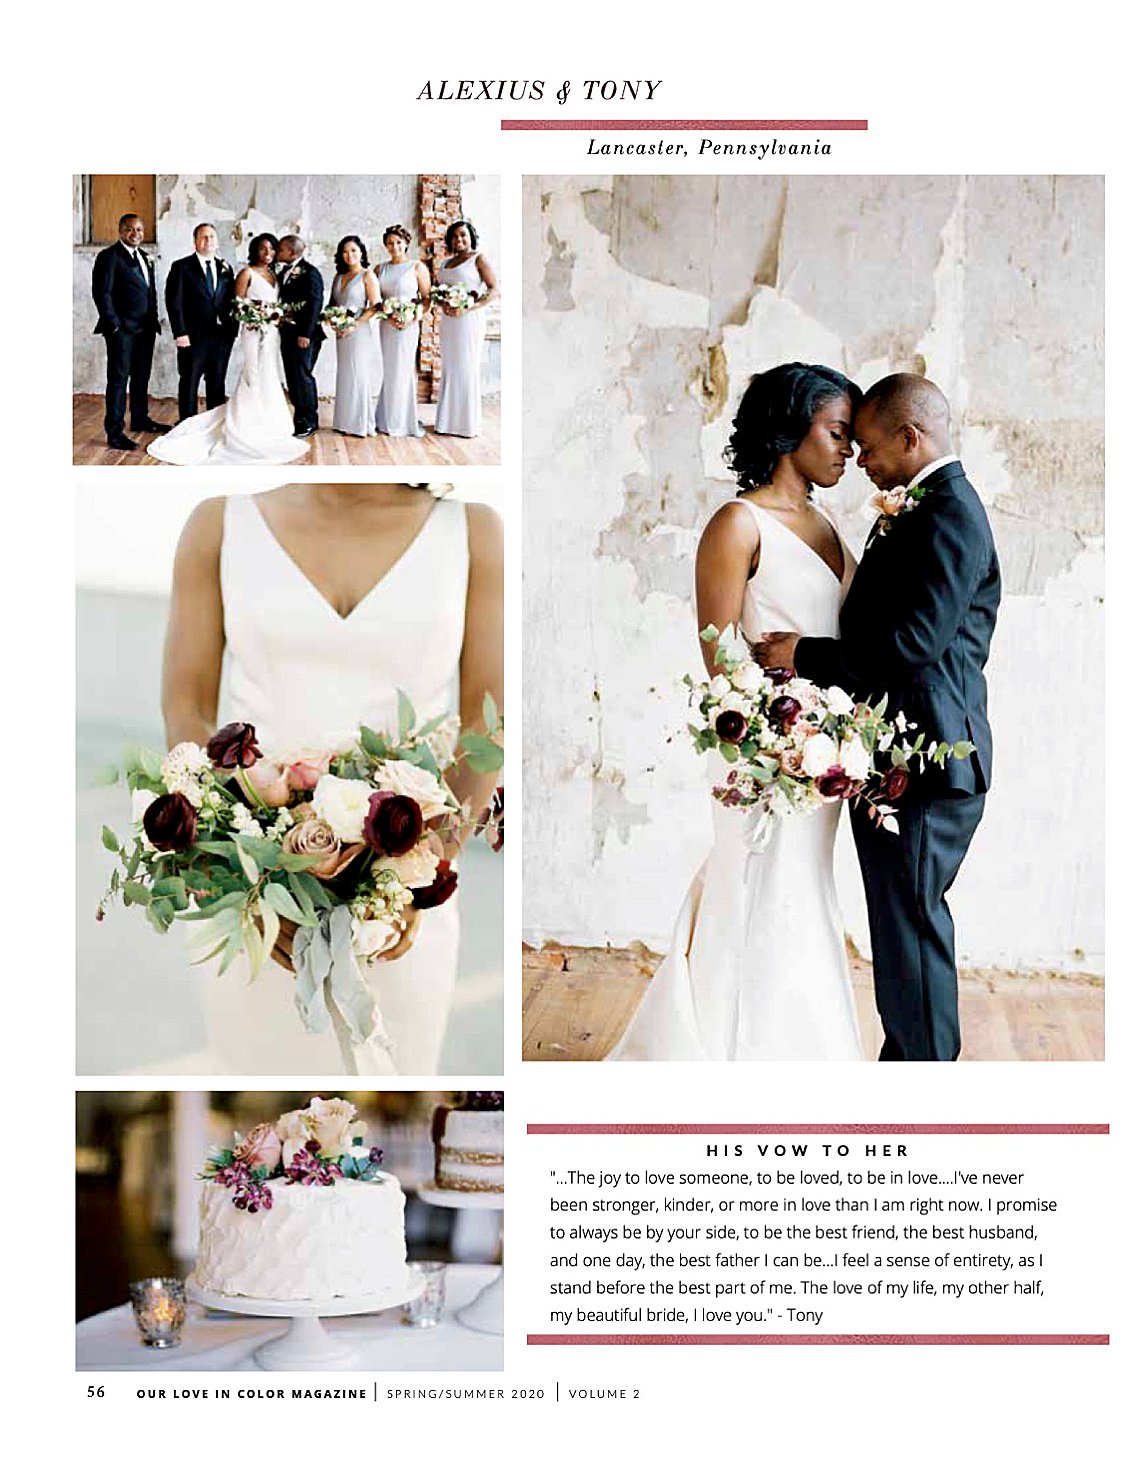 Alexius and Tony's Spring Lancaster Pennsylvania Wedding at the Excelsior is featured in Our Love In Color Volume II. Photography by Pennsylvania Film Wedding Photographer, Renee Hollingshead with Simply Events, Laura of Lauxmont, Glam Qui, Francesca's Bridal, Badgley Mischka, and more!